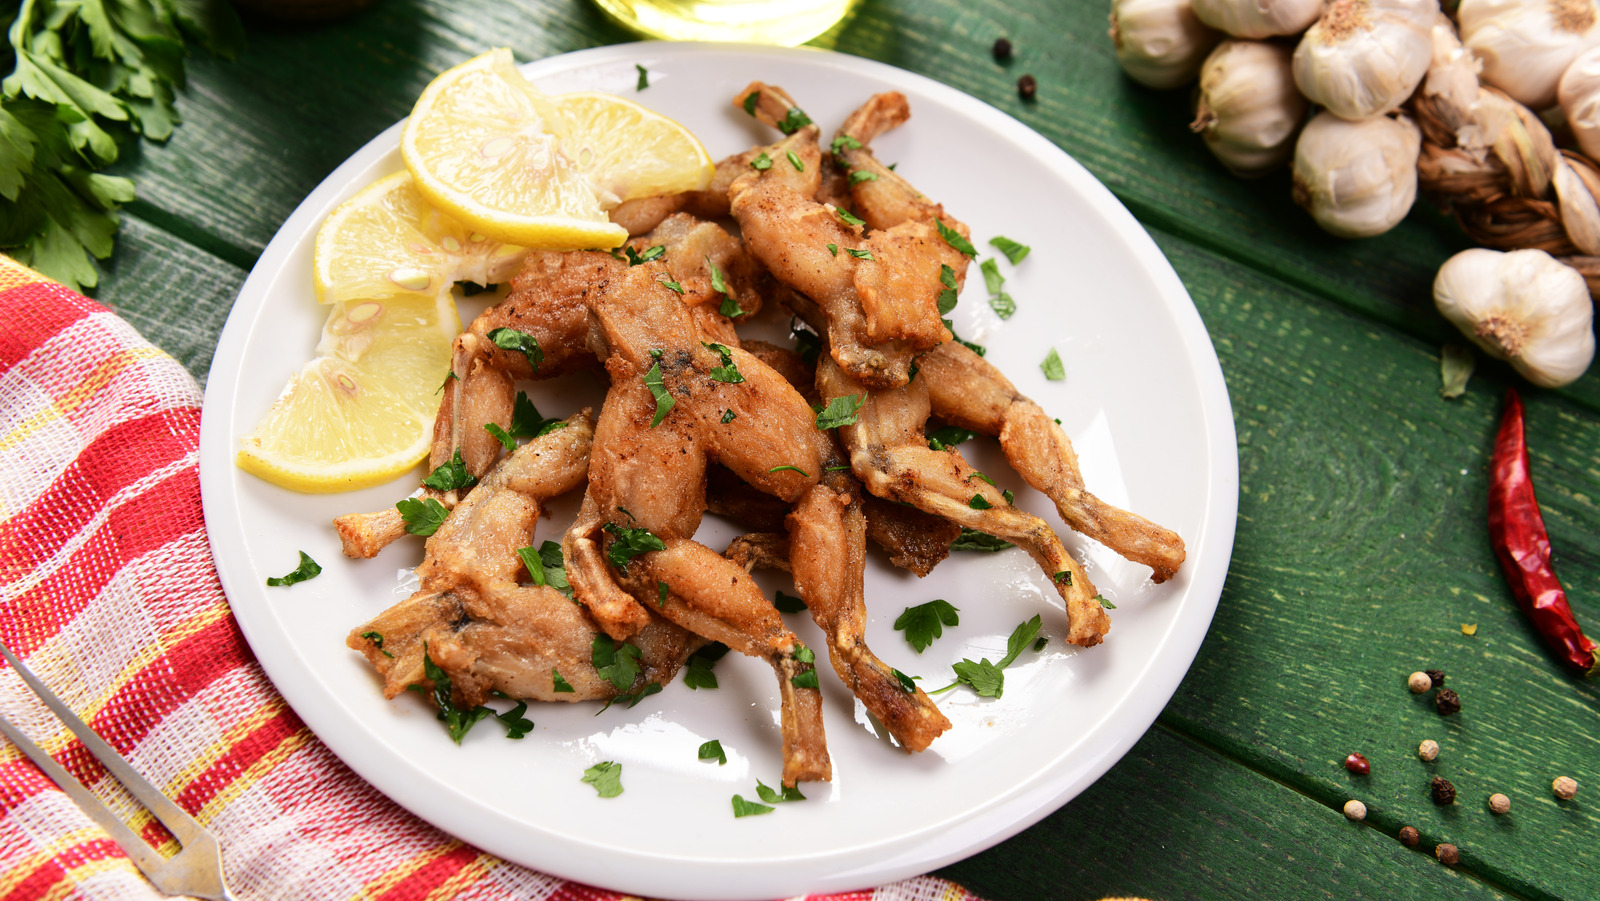 The Real Reason Frogs' Legs May Soon Be Off The Menu